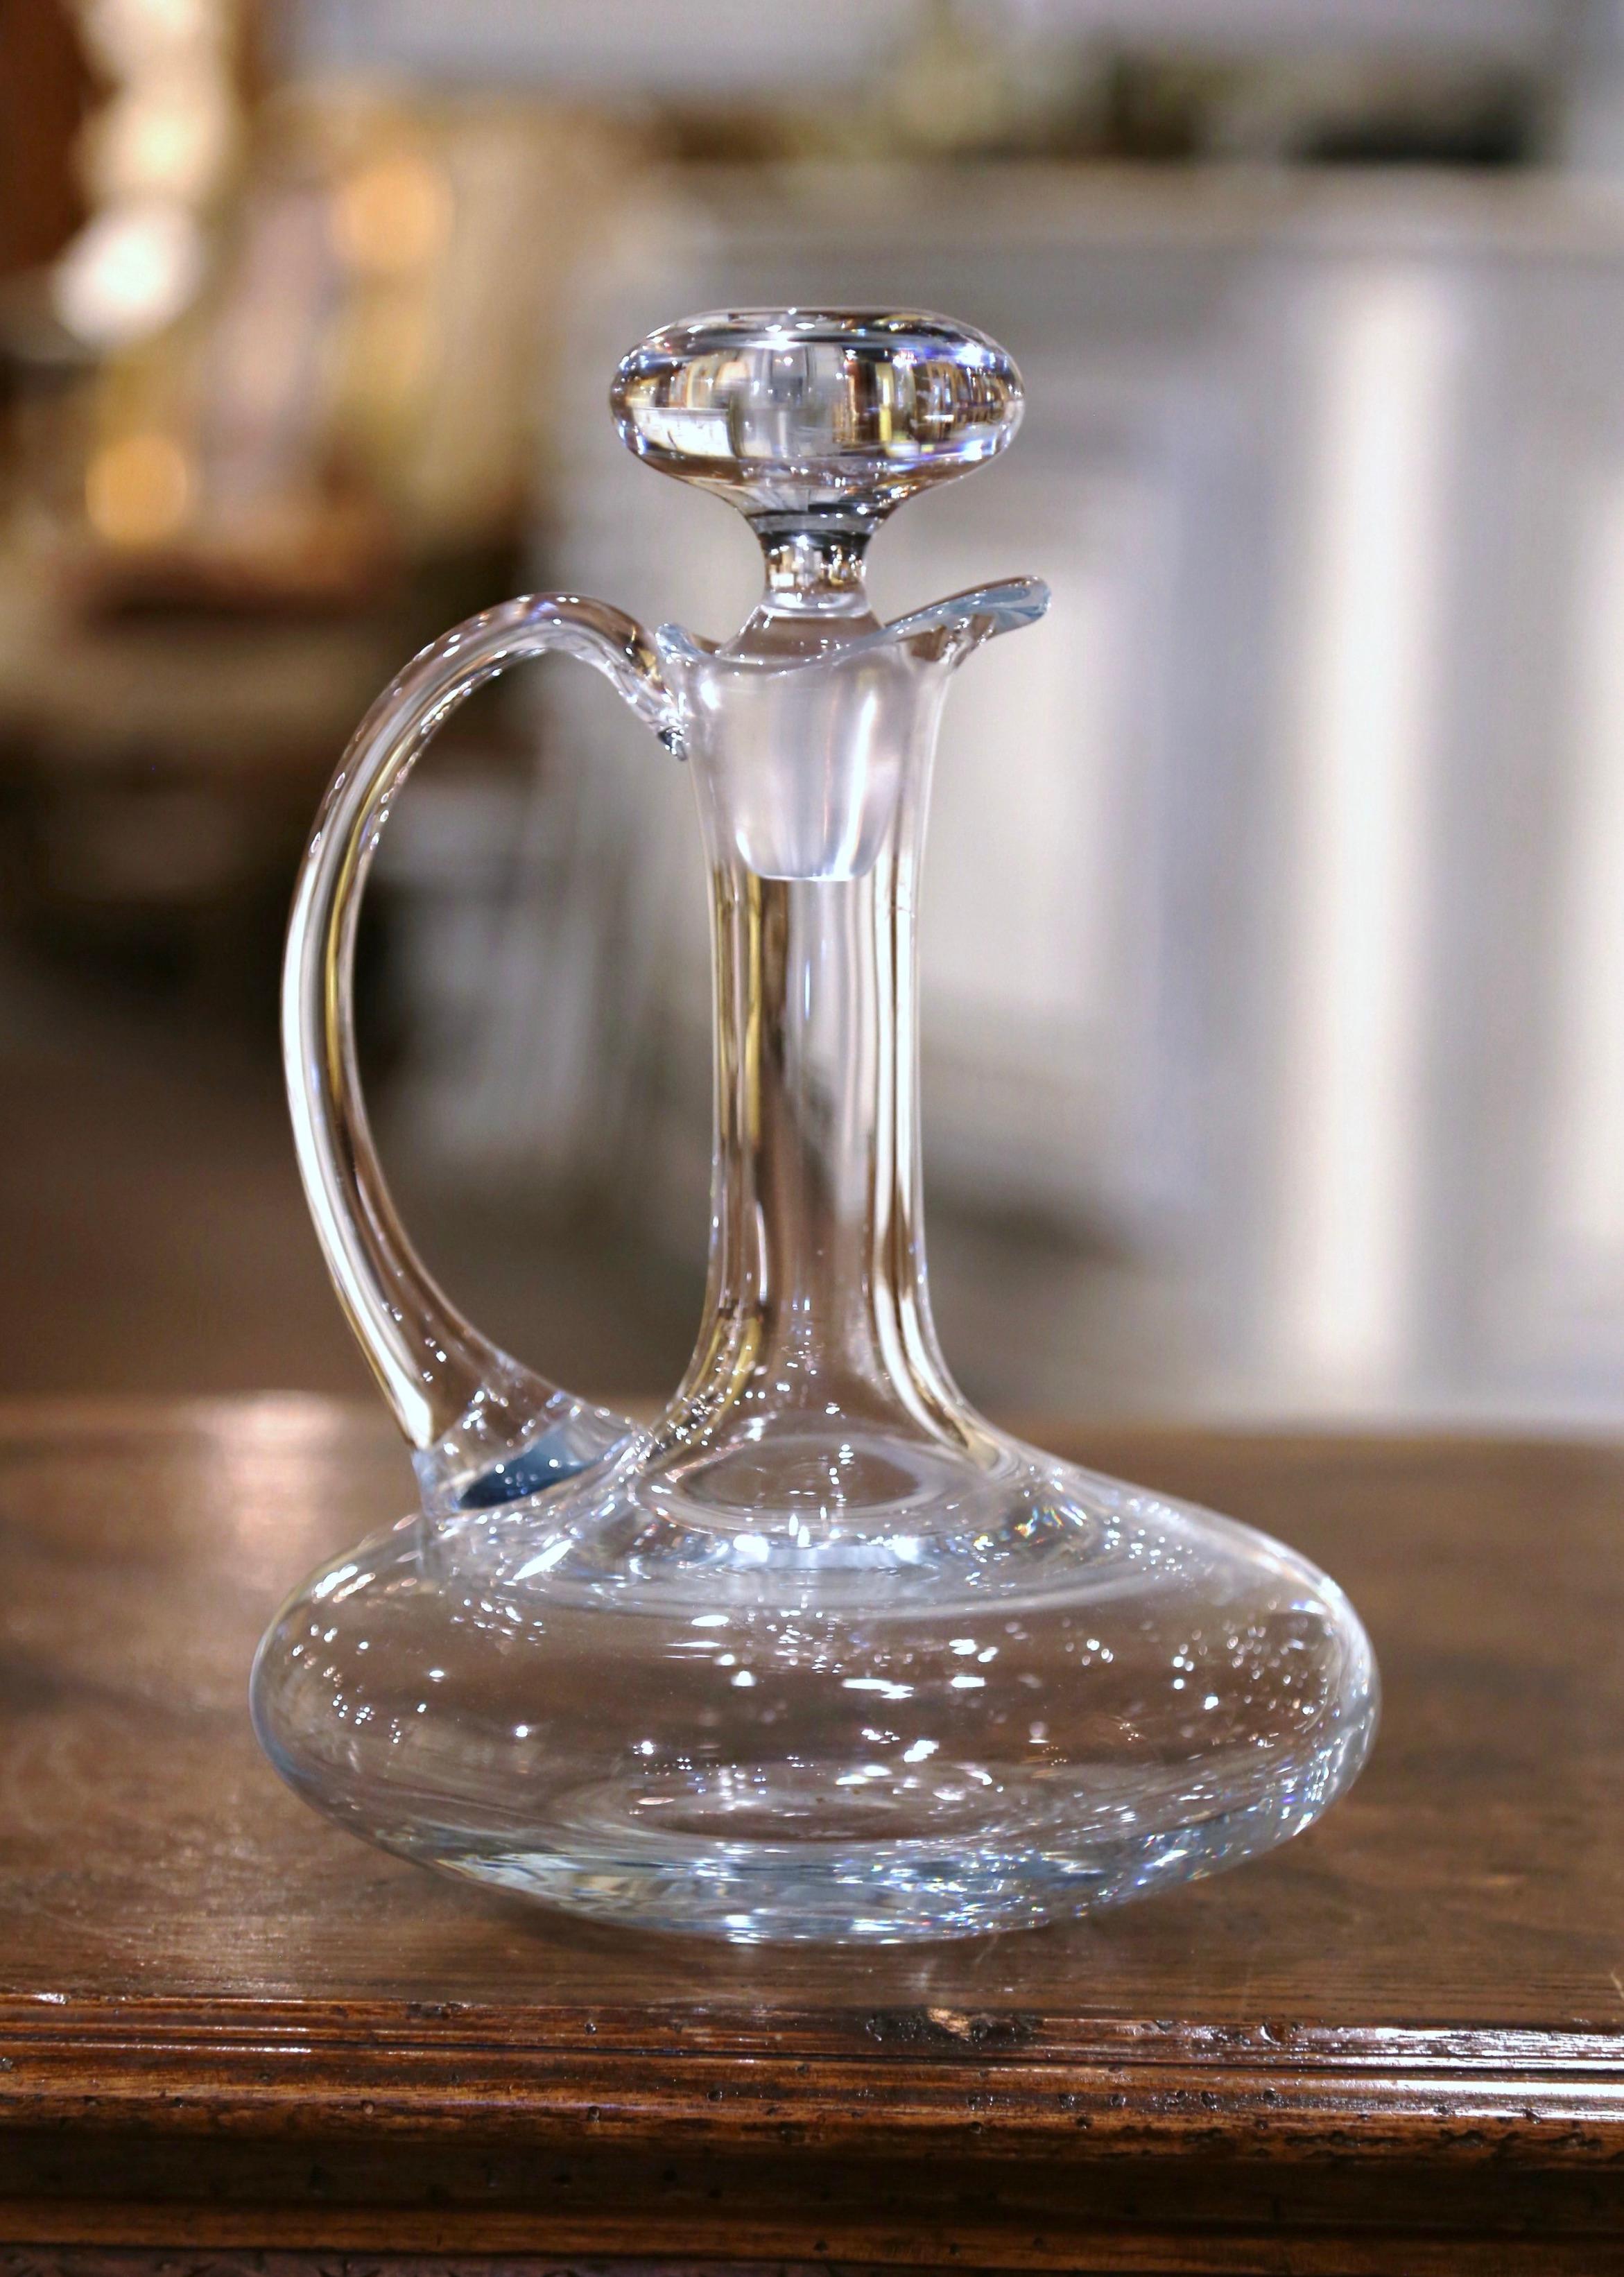 Let your red Bordeaux or Cabernet Sauvignon breeze in this elegant vintage wine carafe! Crafted in France circa 1960, the glass pitcher has the ideal shape to decant a bottle of red wine, wide at the base for breathing, with a long neck and curved